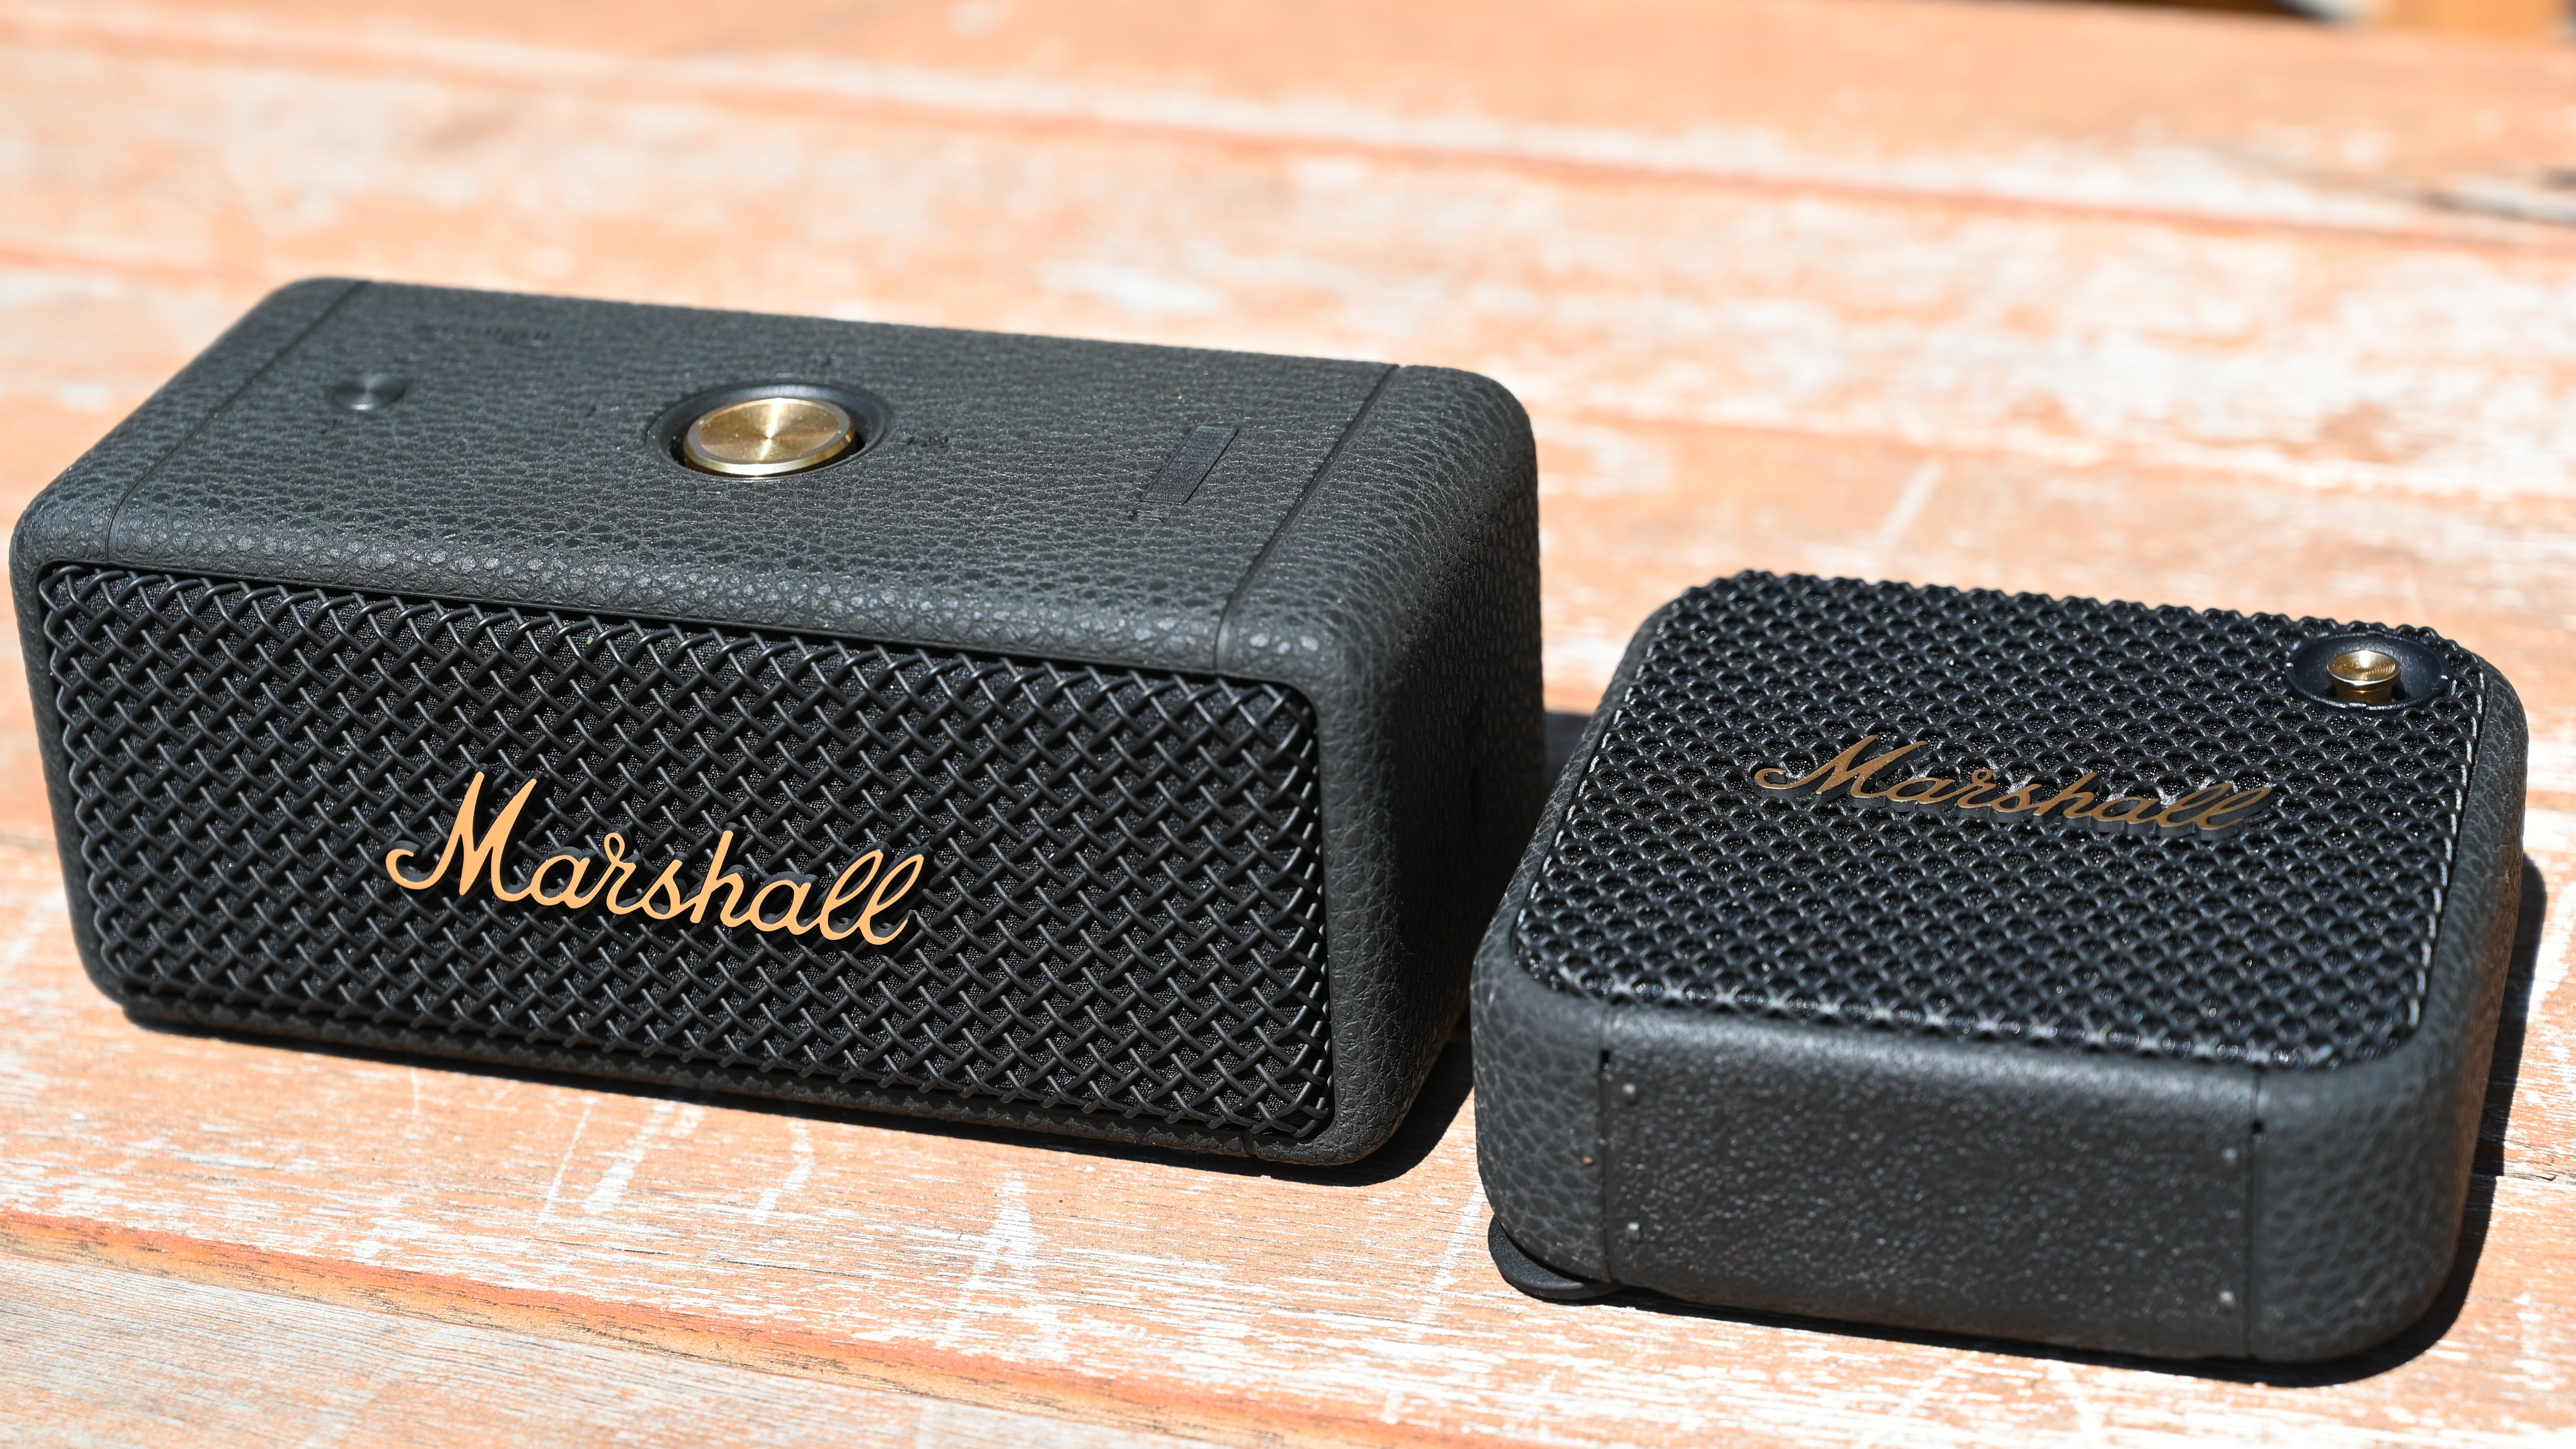 Marshall unveils Willen and Emberton II speakers with Stack Mode feature -   News